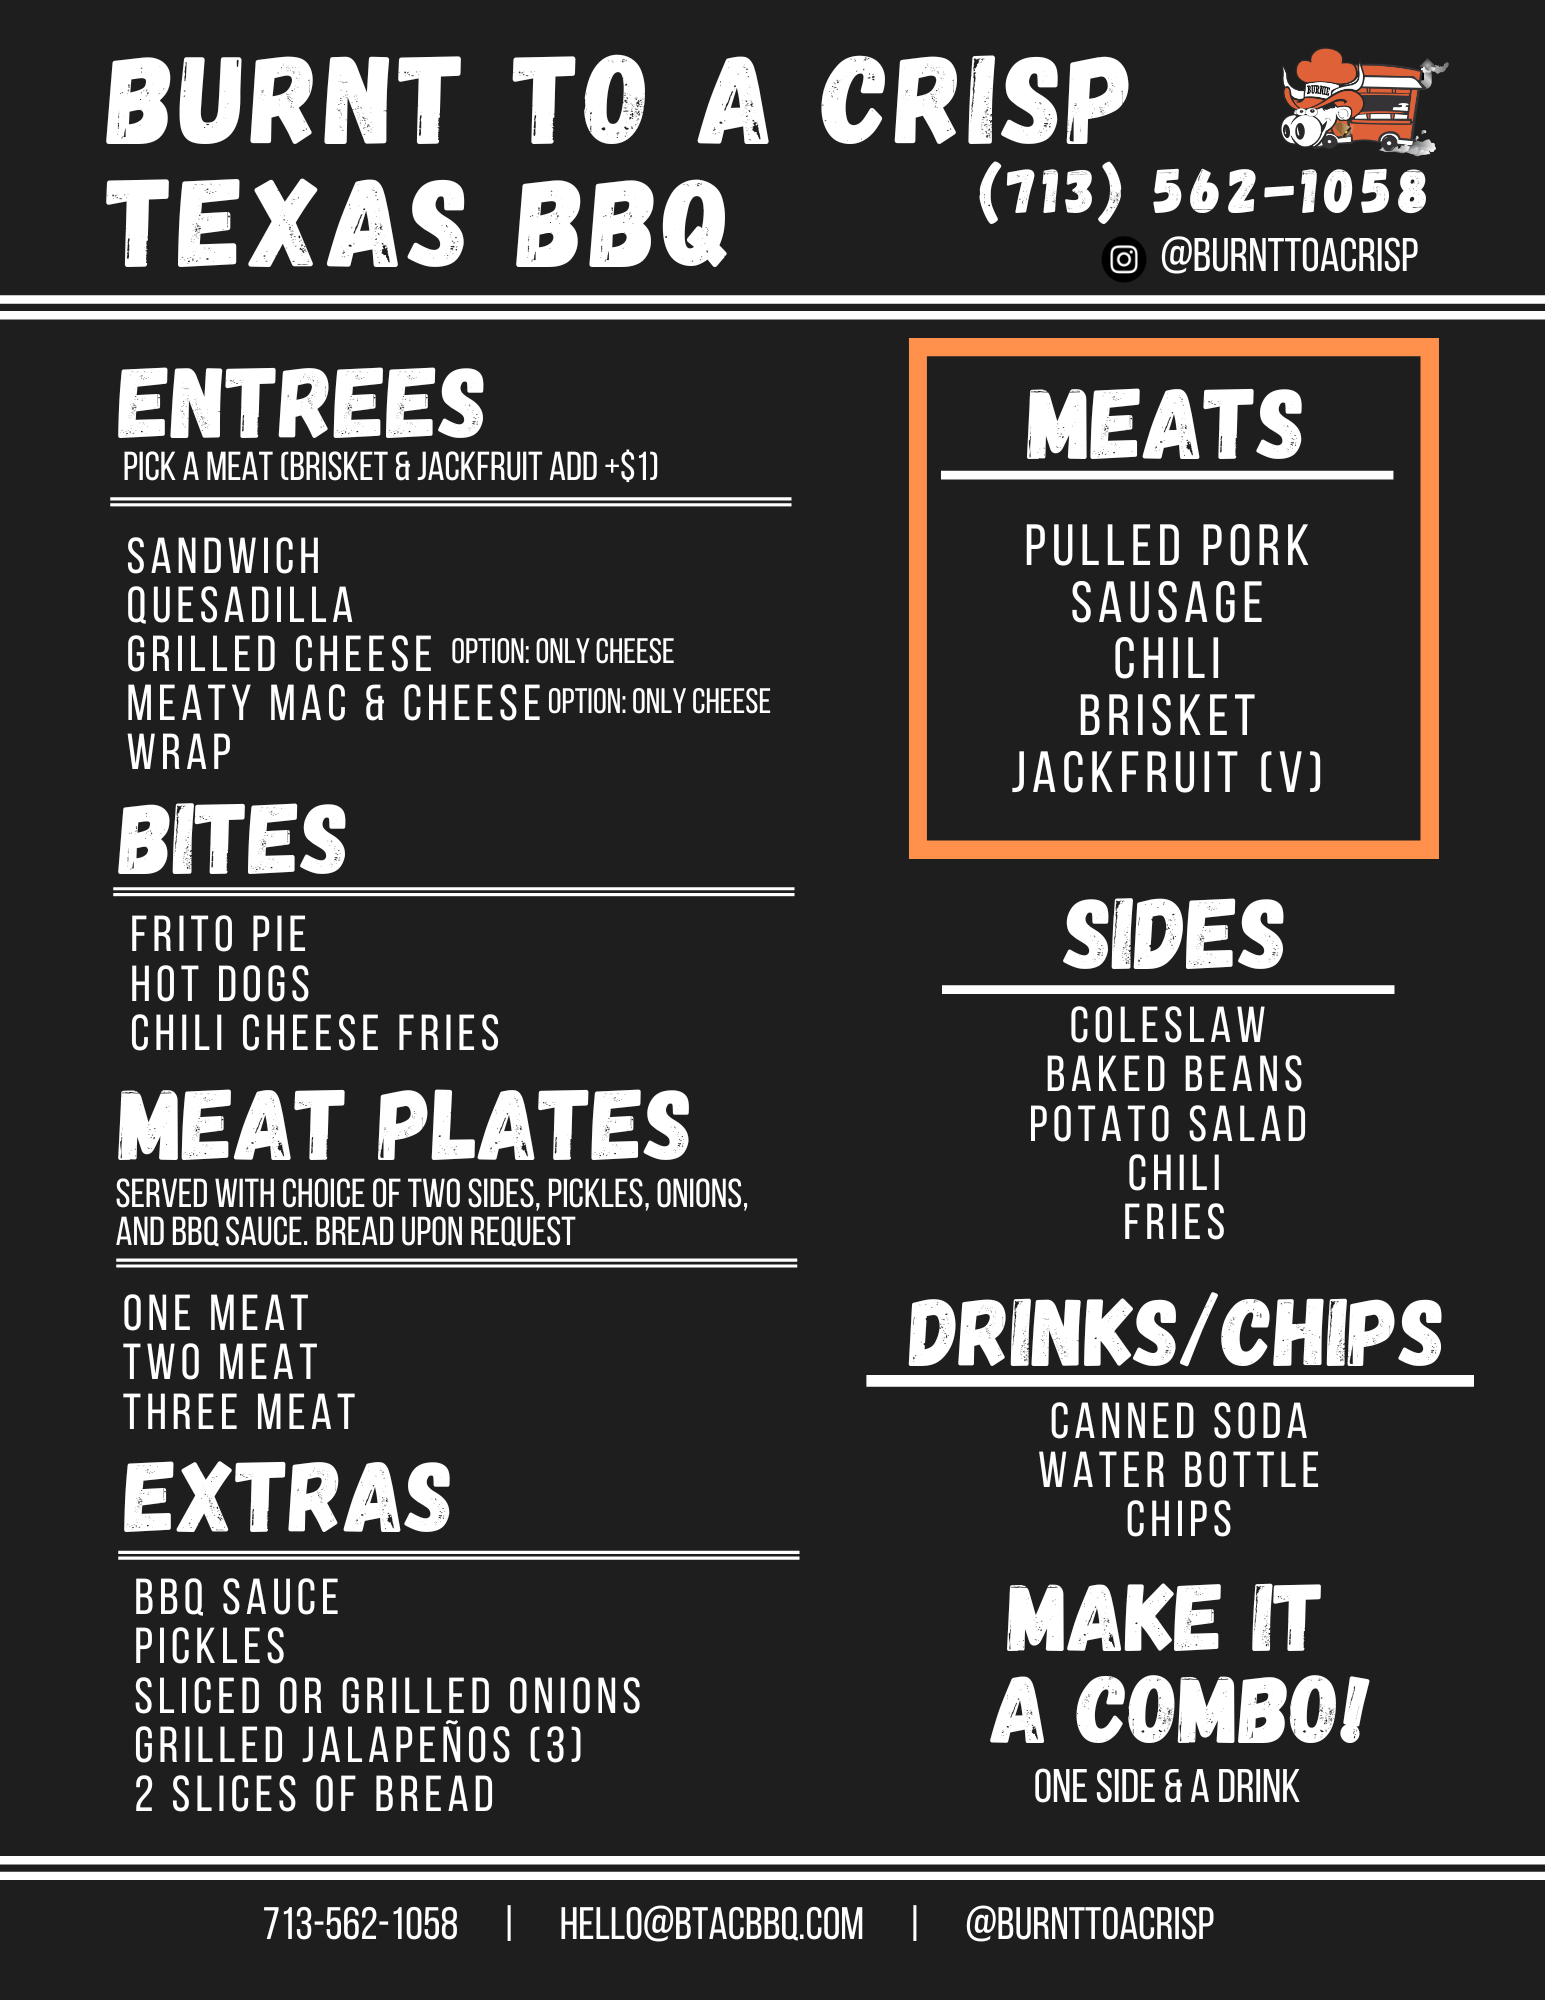 This is a photo of a menu. The menu belongs to Burnt to a Crisp BBQ food truck in Los Angeles, CA. They sell brisket, pulled pork, sausage, potato salad, fries, coleslaw, sodas, chips.